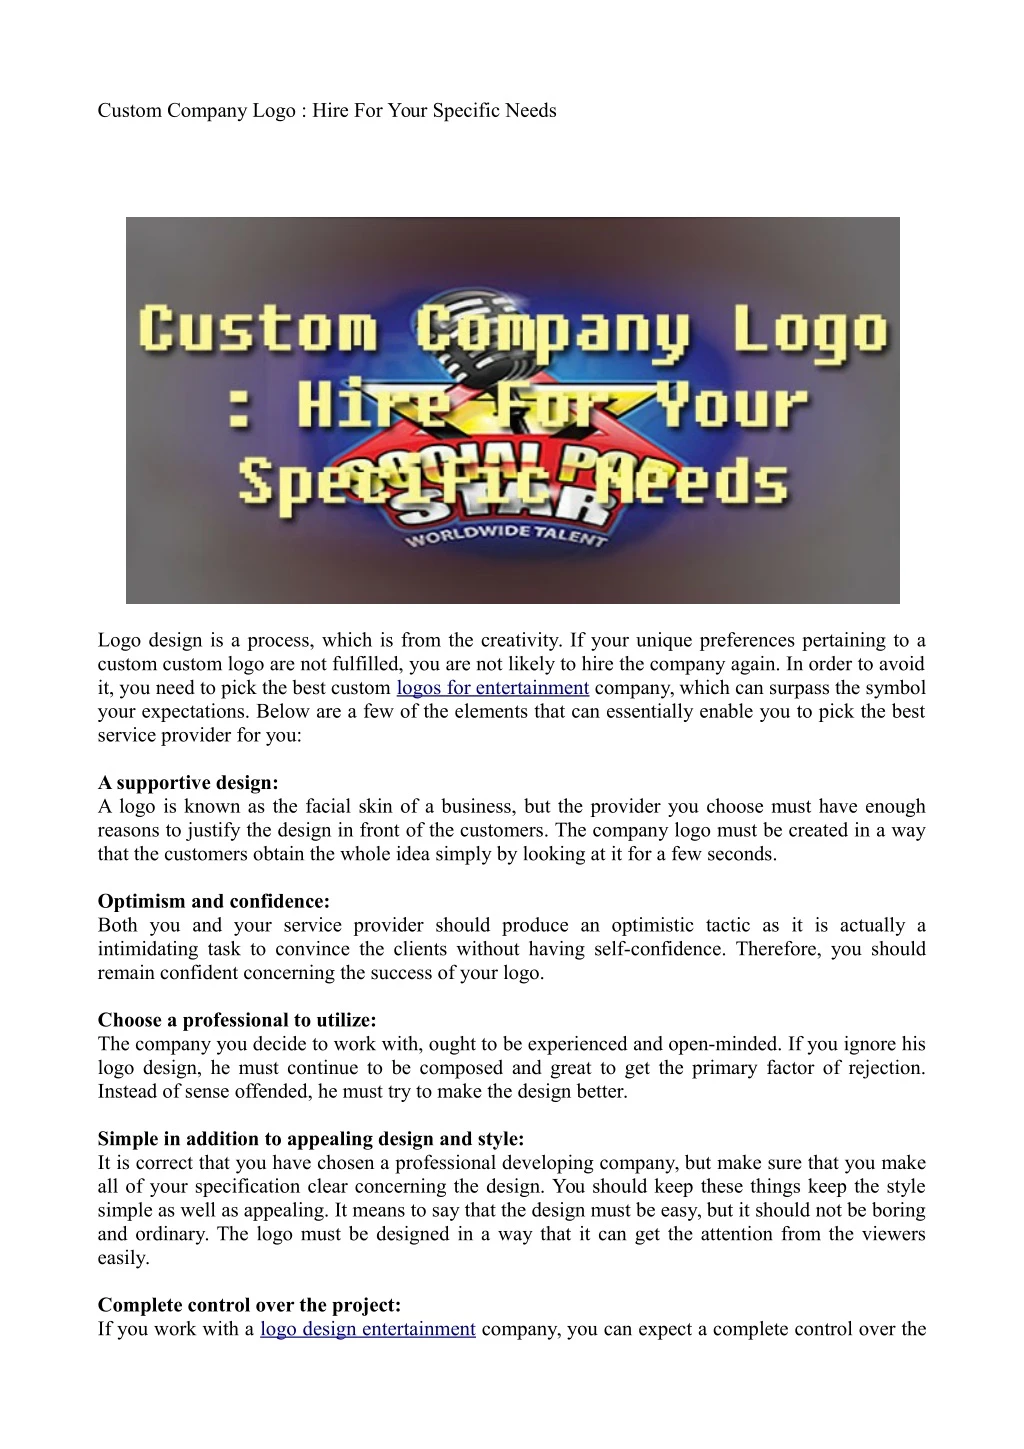 custom company logo hire for your specific needs